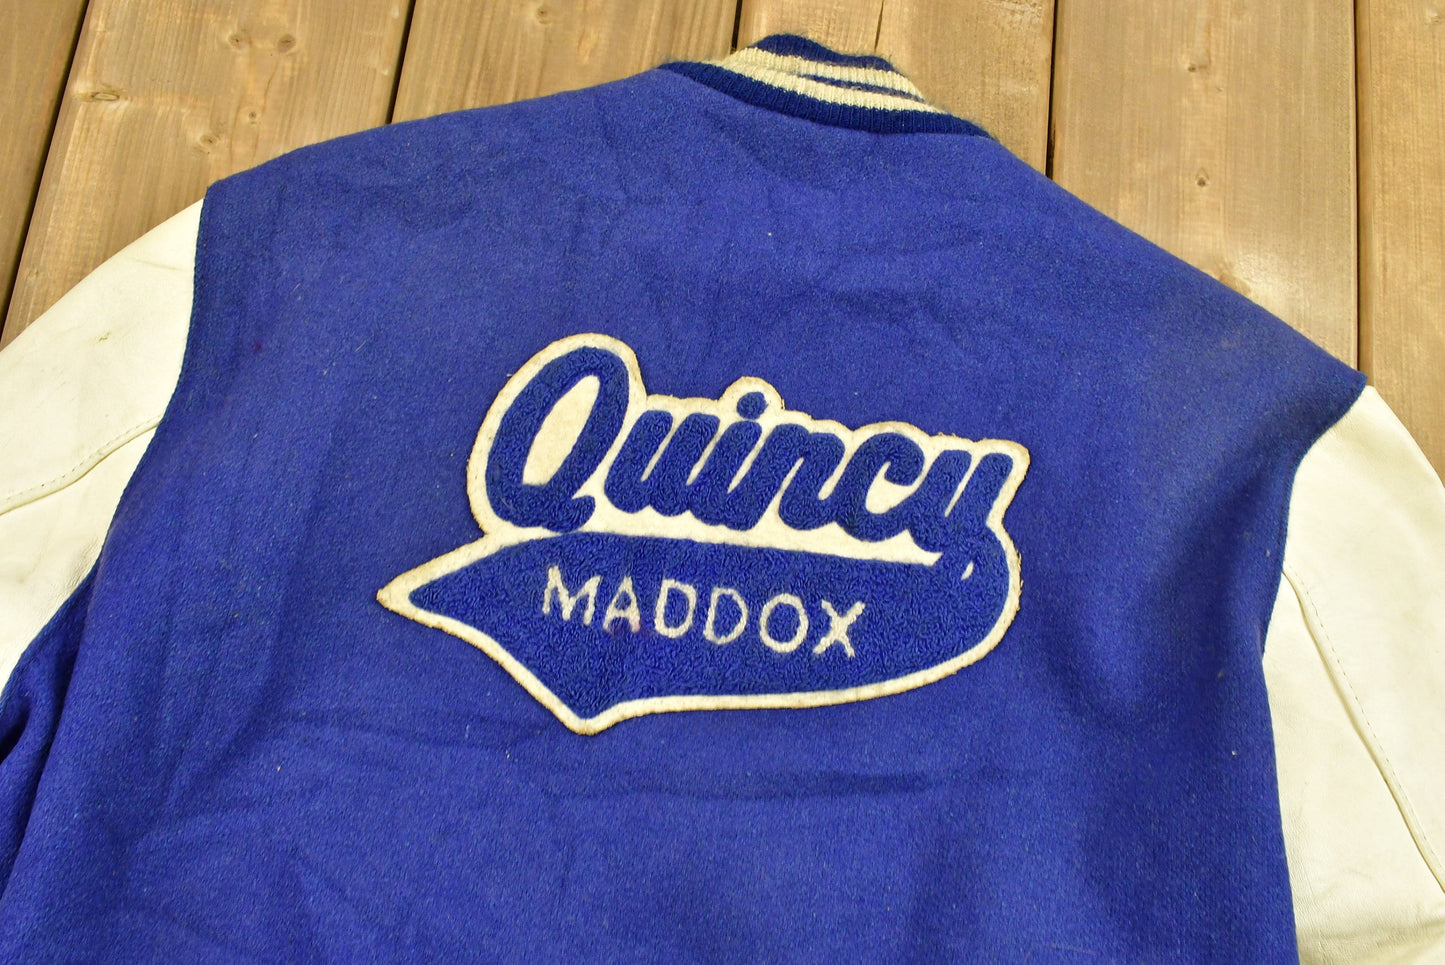 Vintage 80s / 90s / Quincy Maddox Leather Delong Varsity Jacket /Letterman Jacket / Leather Coat / Made In USA / Streetwear Fashion